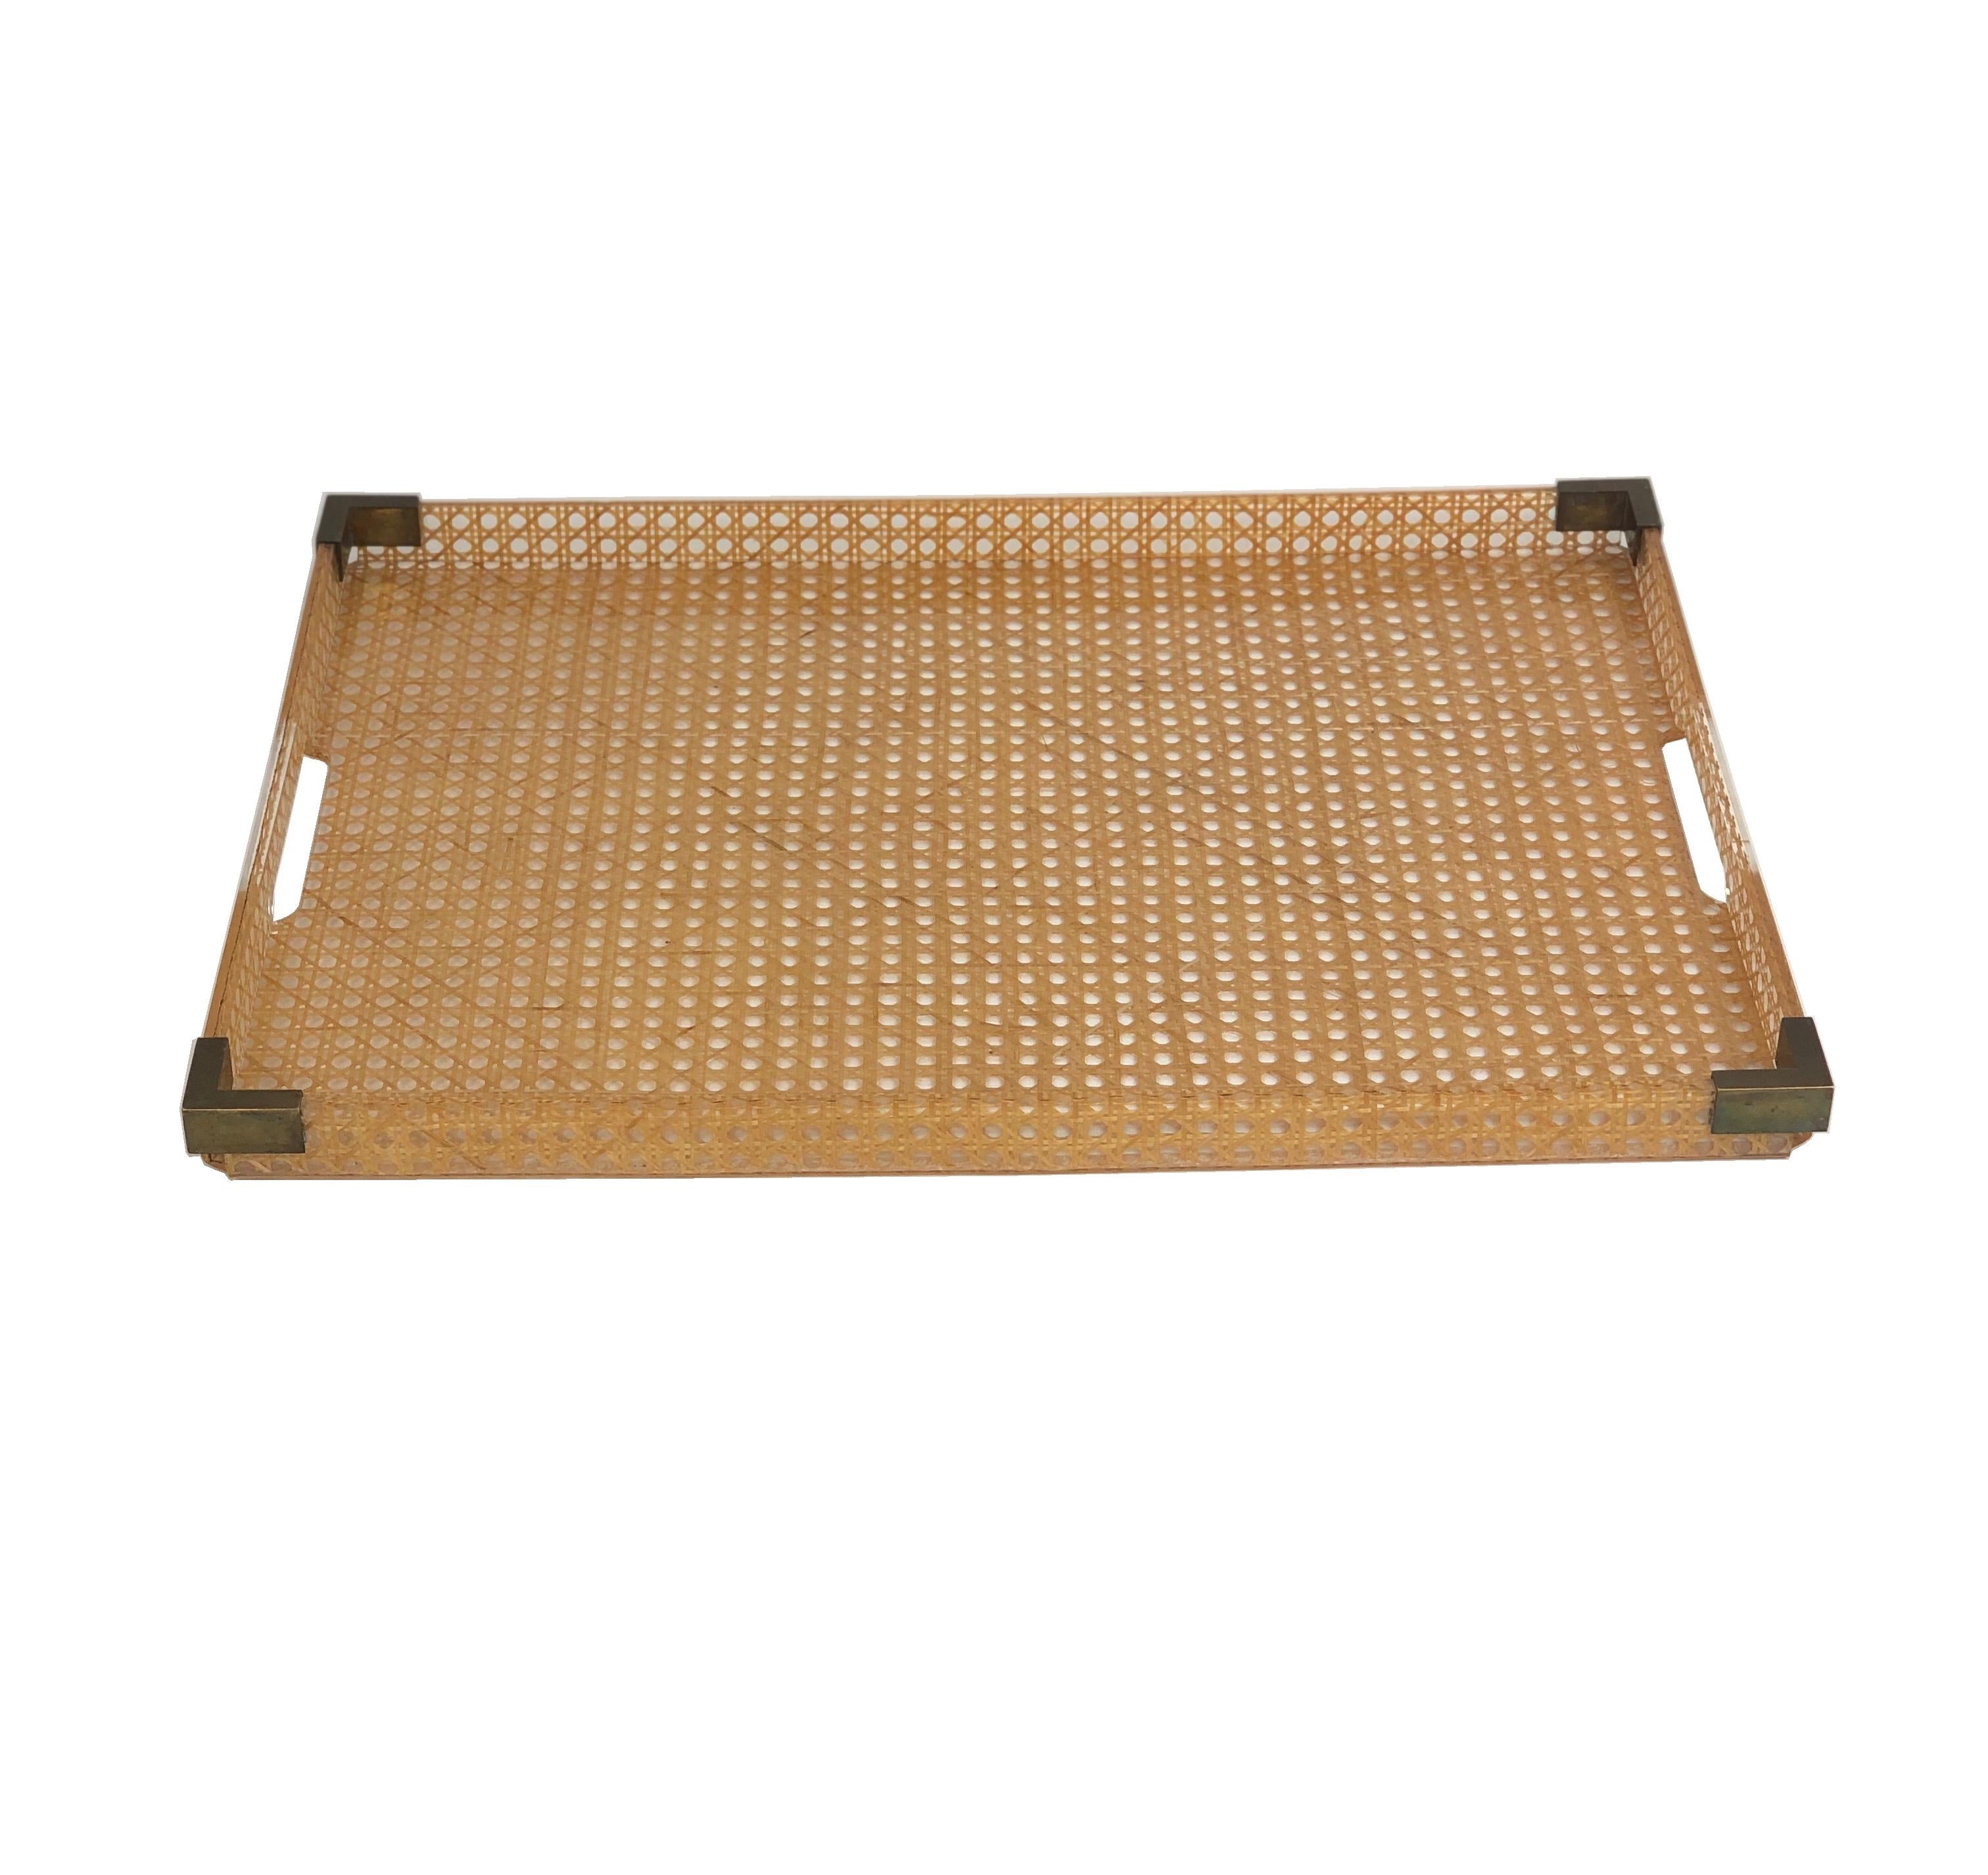 Elegant large butler serving tray made of Lucite and Rattan designed for Christian Dior Home collection in 1970s. Geometric shape with gilt brass gallery and real rattan cane-work embedded in the crystal clear Lucite. Corners are embedded with